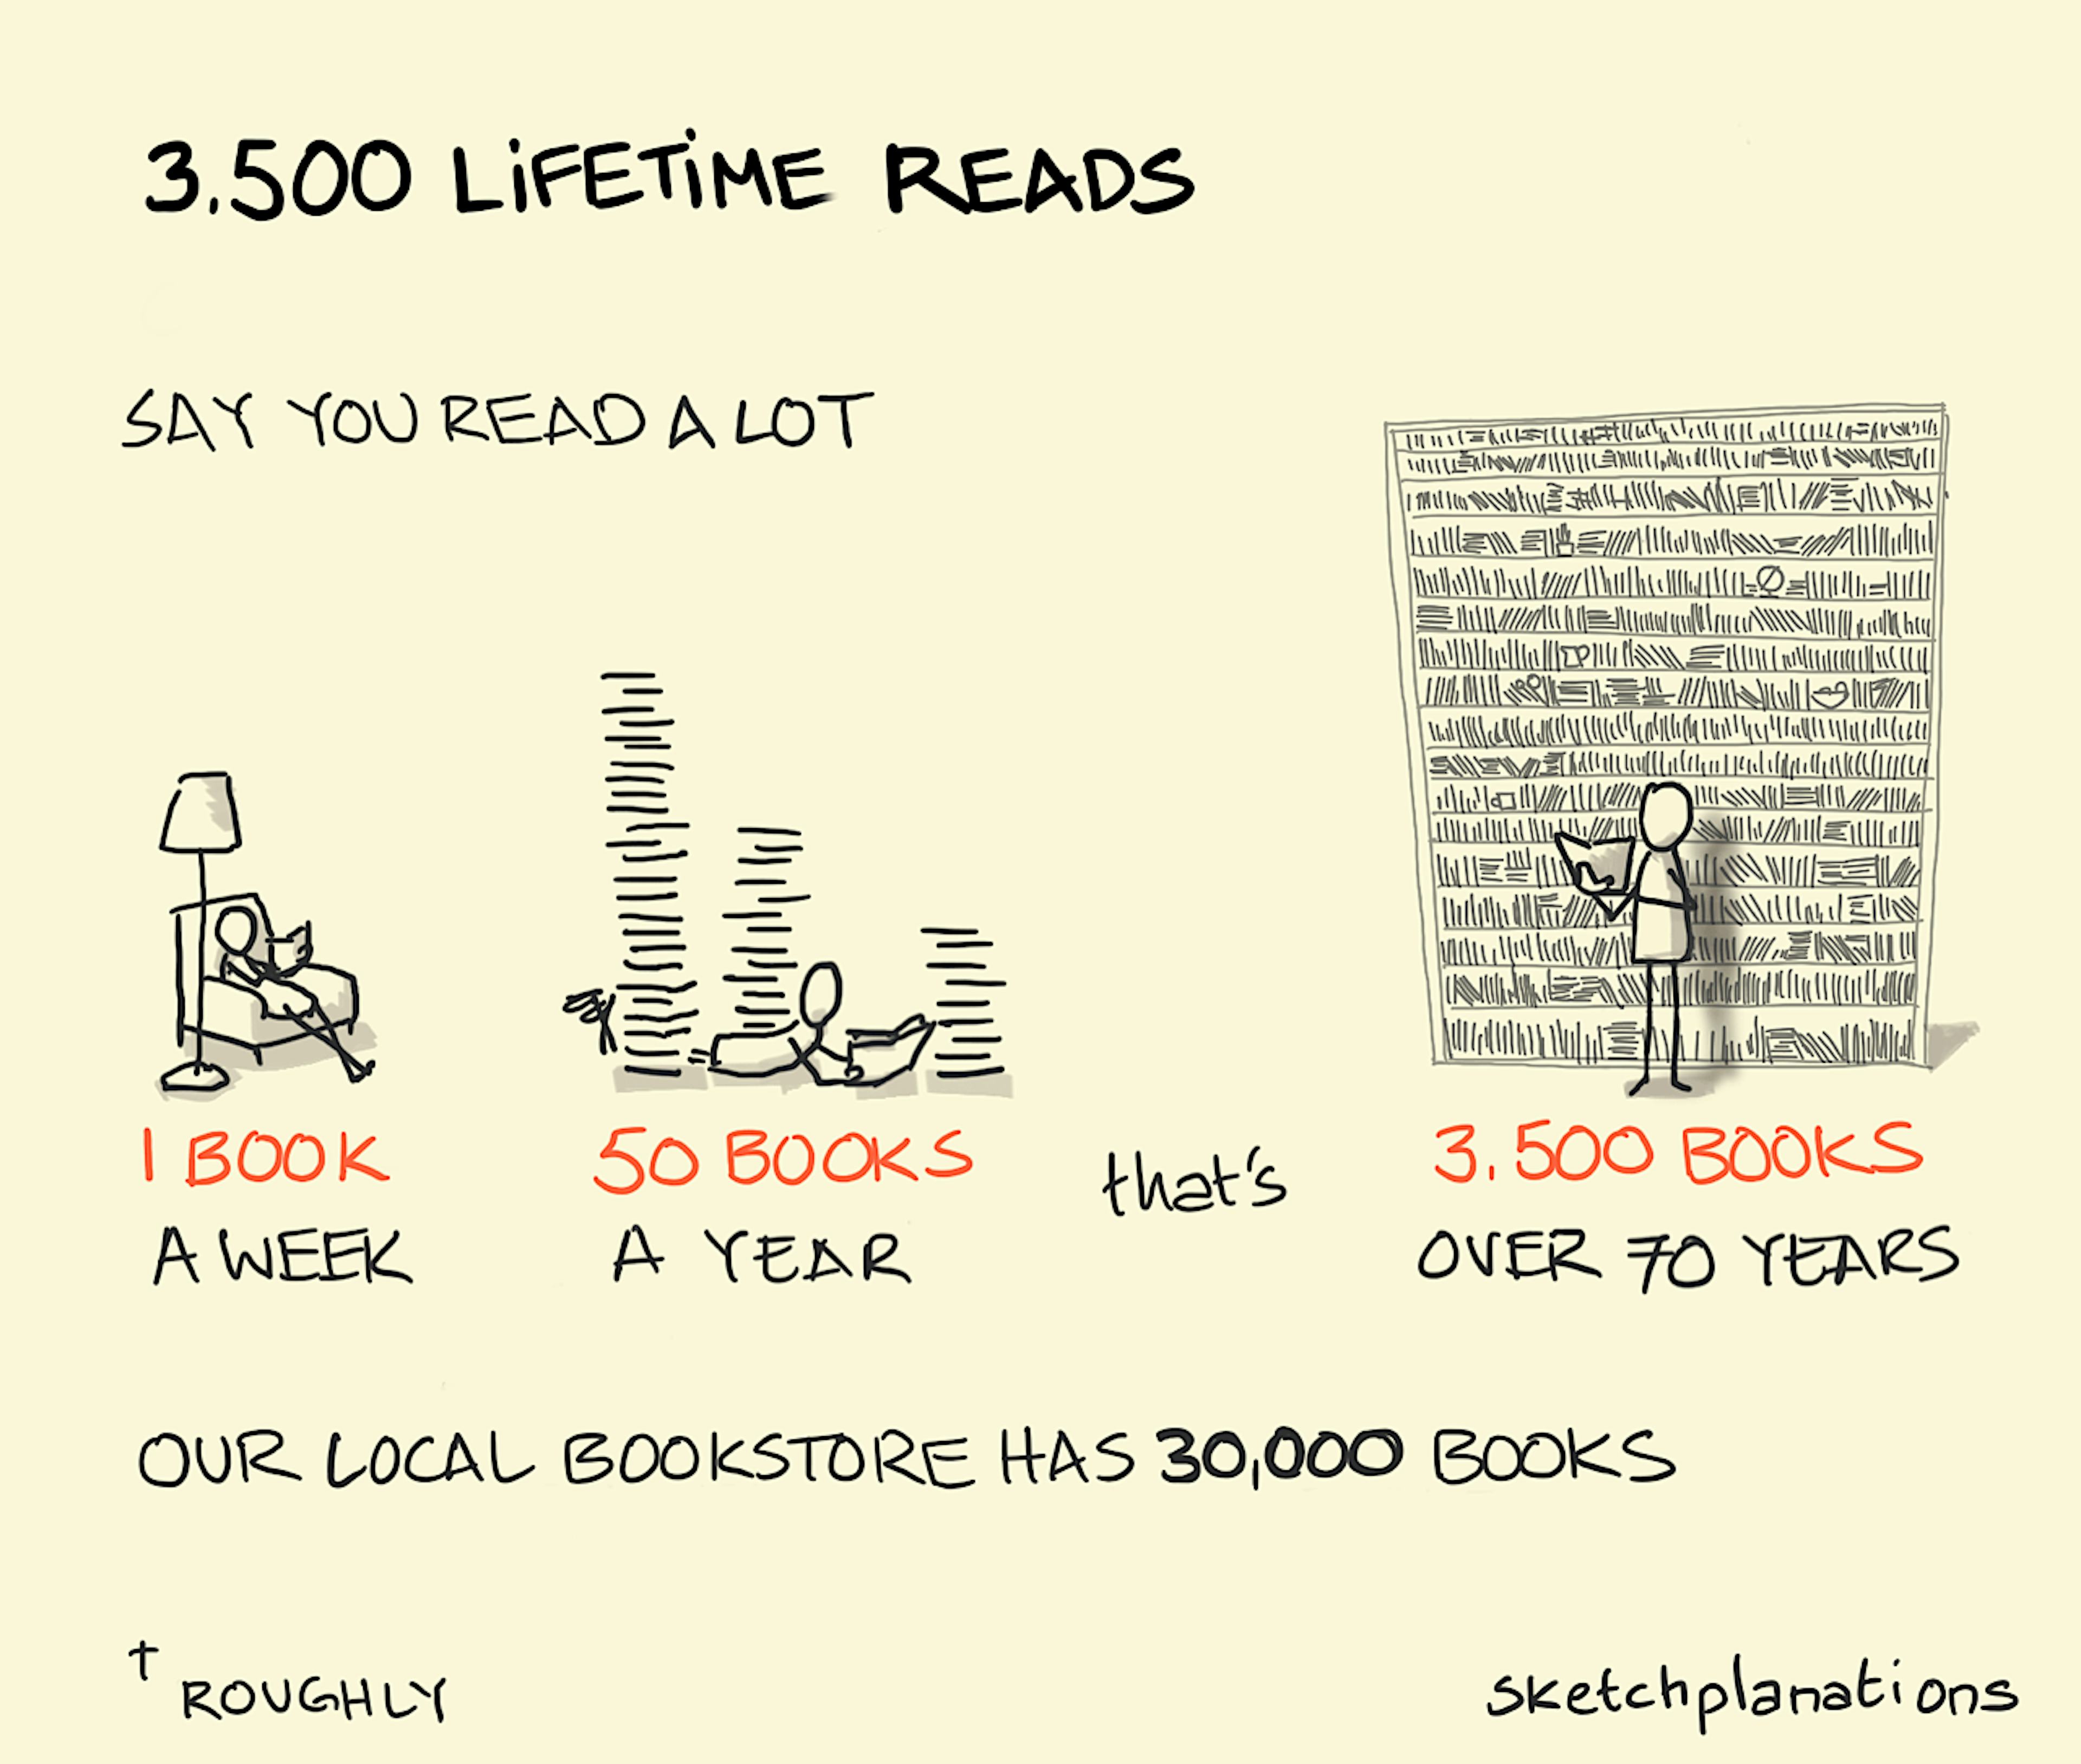 3,500 lifetime reads: how many books will you read in a lifetime if you read 1 book a week, 50 books a year